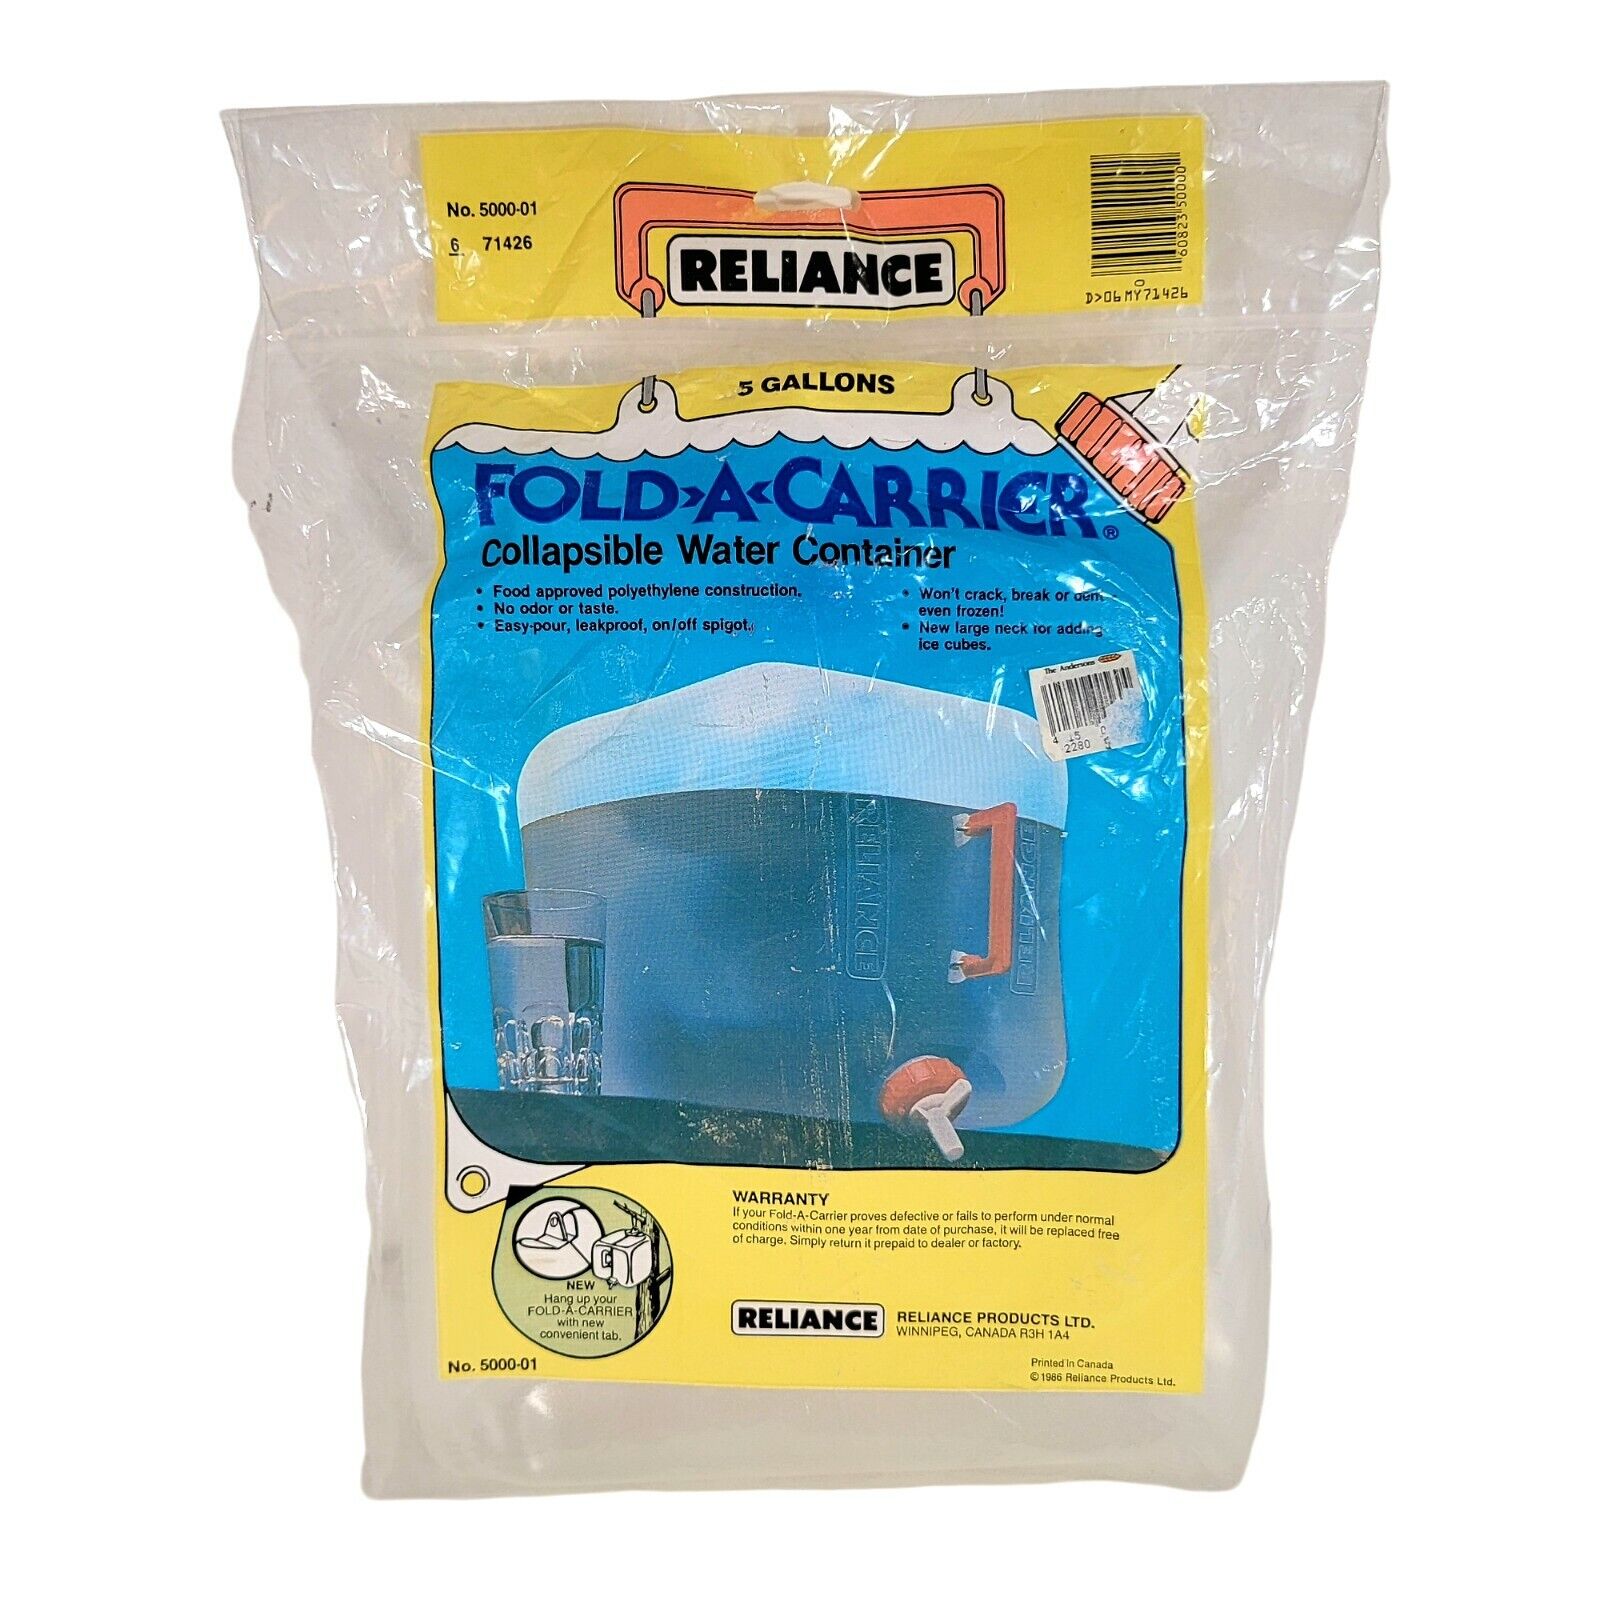 Reliance Fold-a-carrier 5 Gallon Collapsible Water Container 5000-01